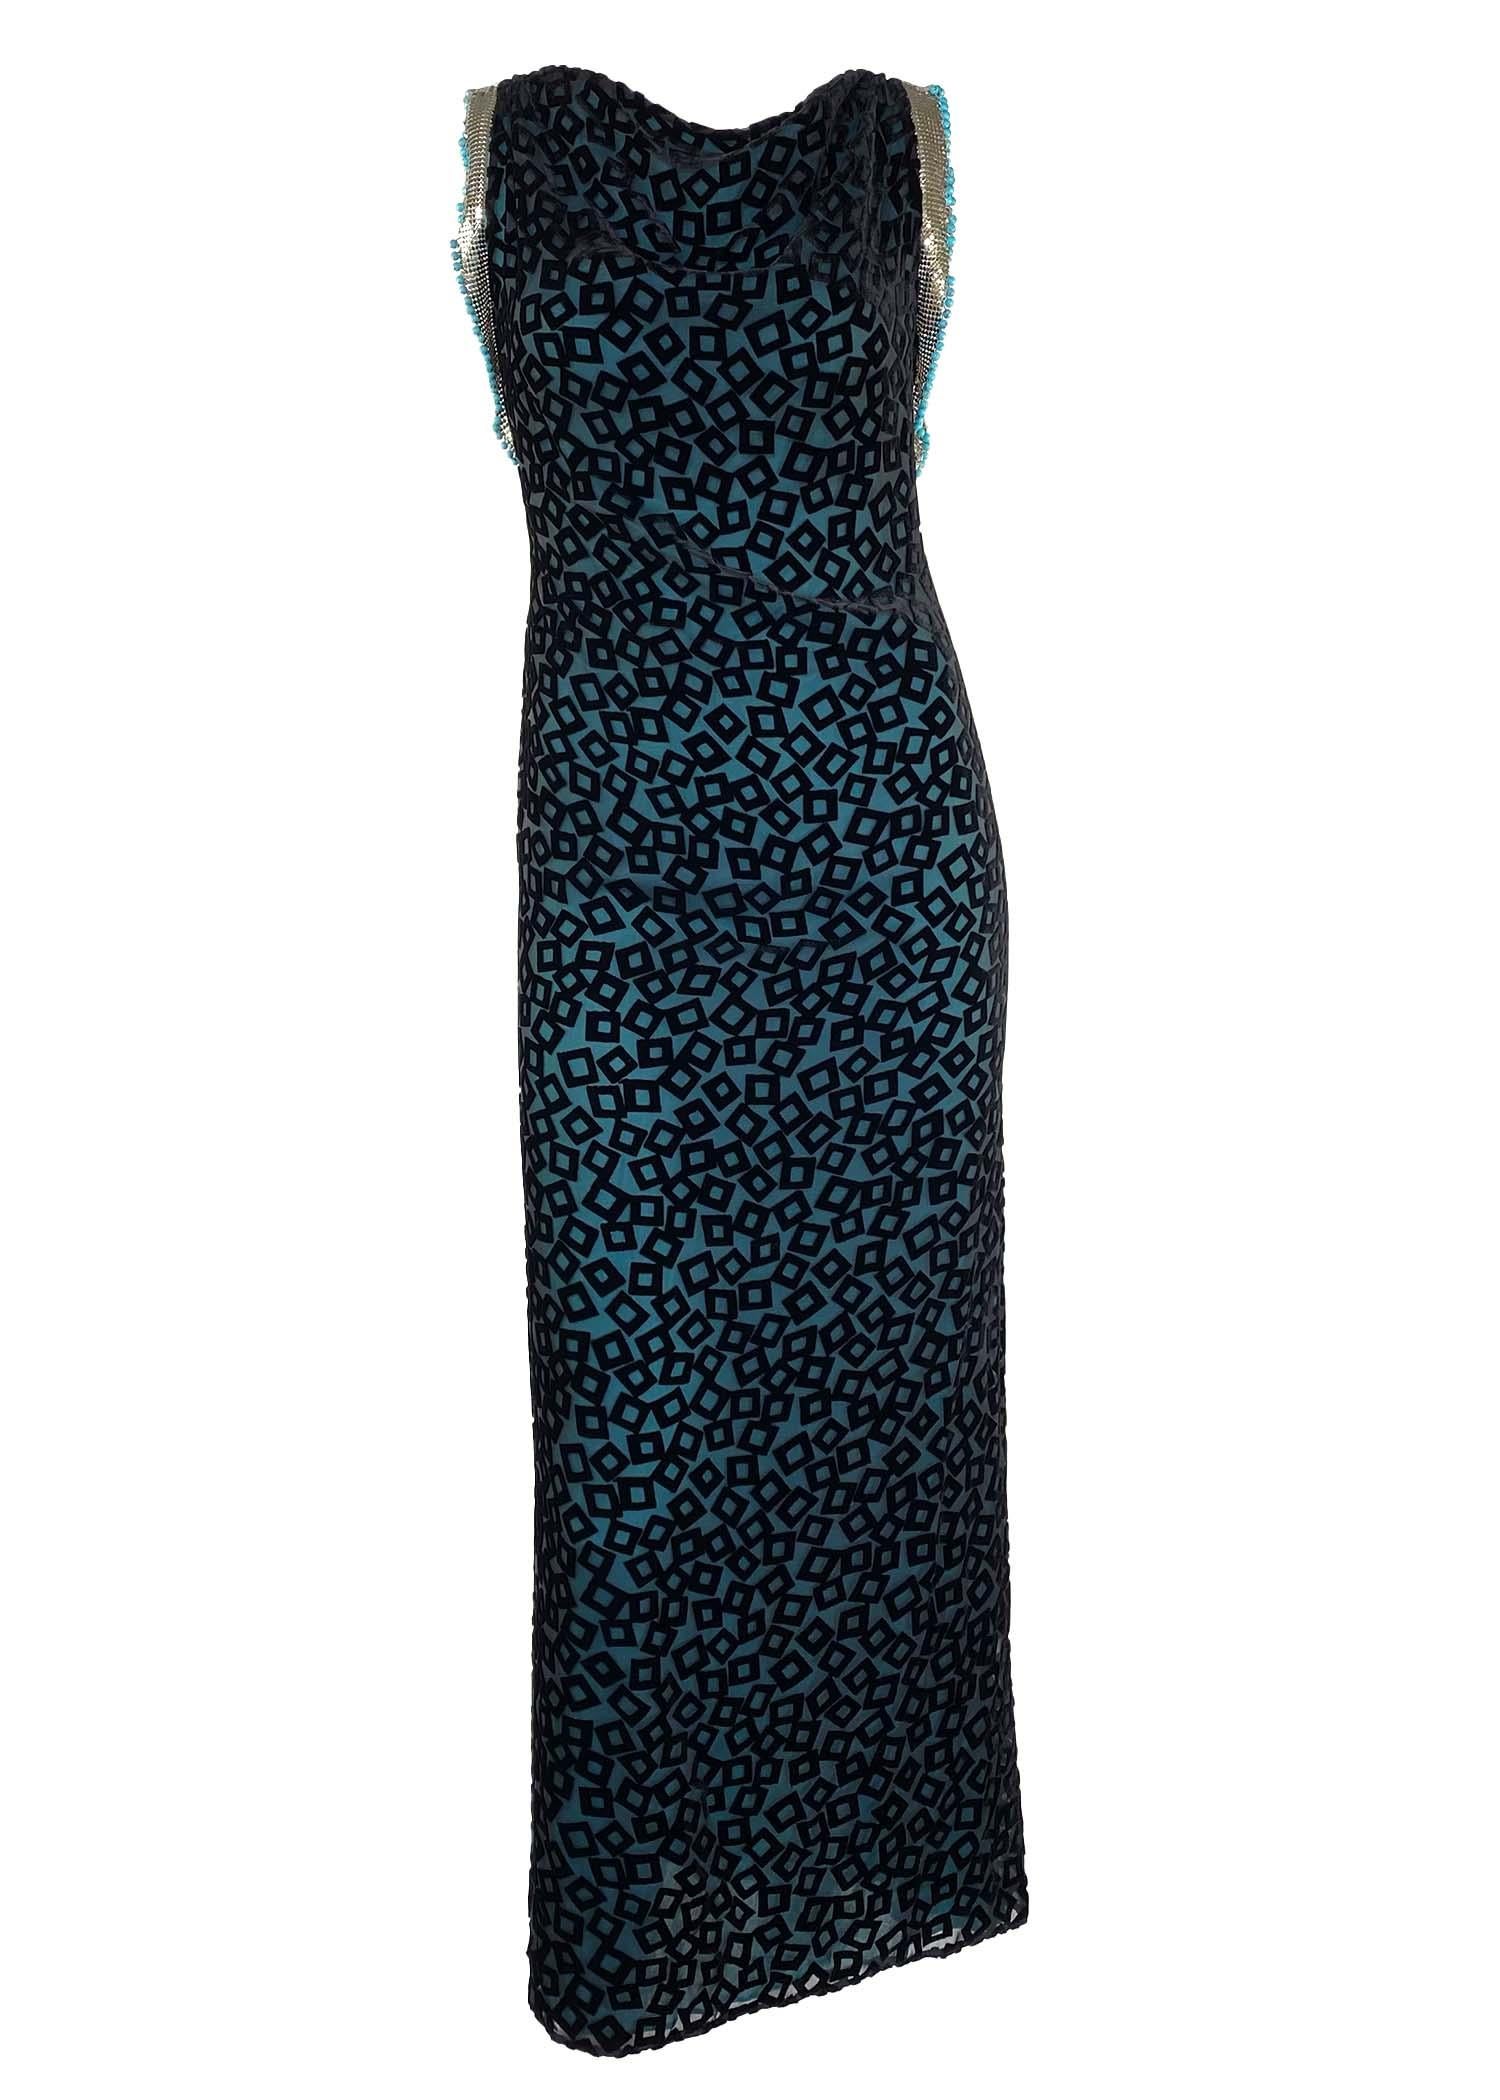 F/W 1999 Gianni Versace by Donatella Black Velvet Turquoise Beaded Oroton Gown For Sale 2